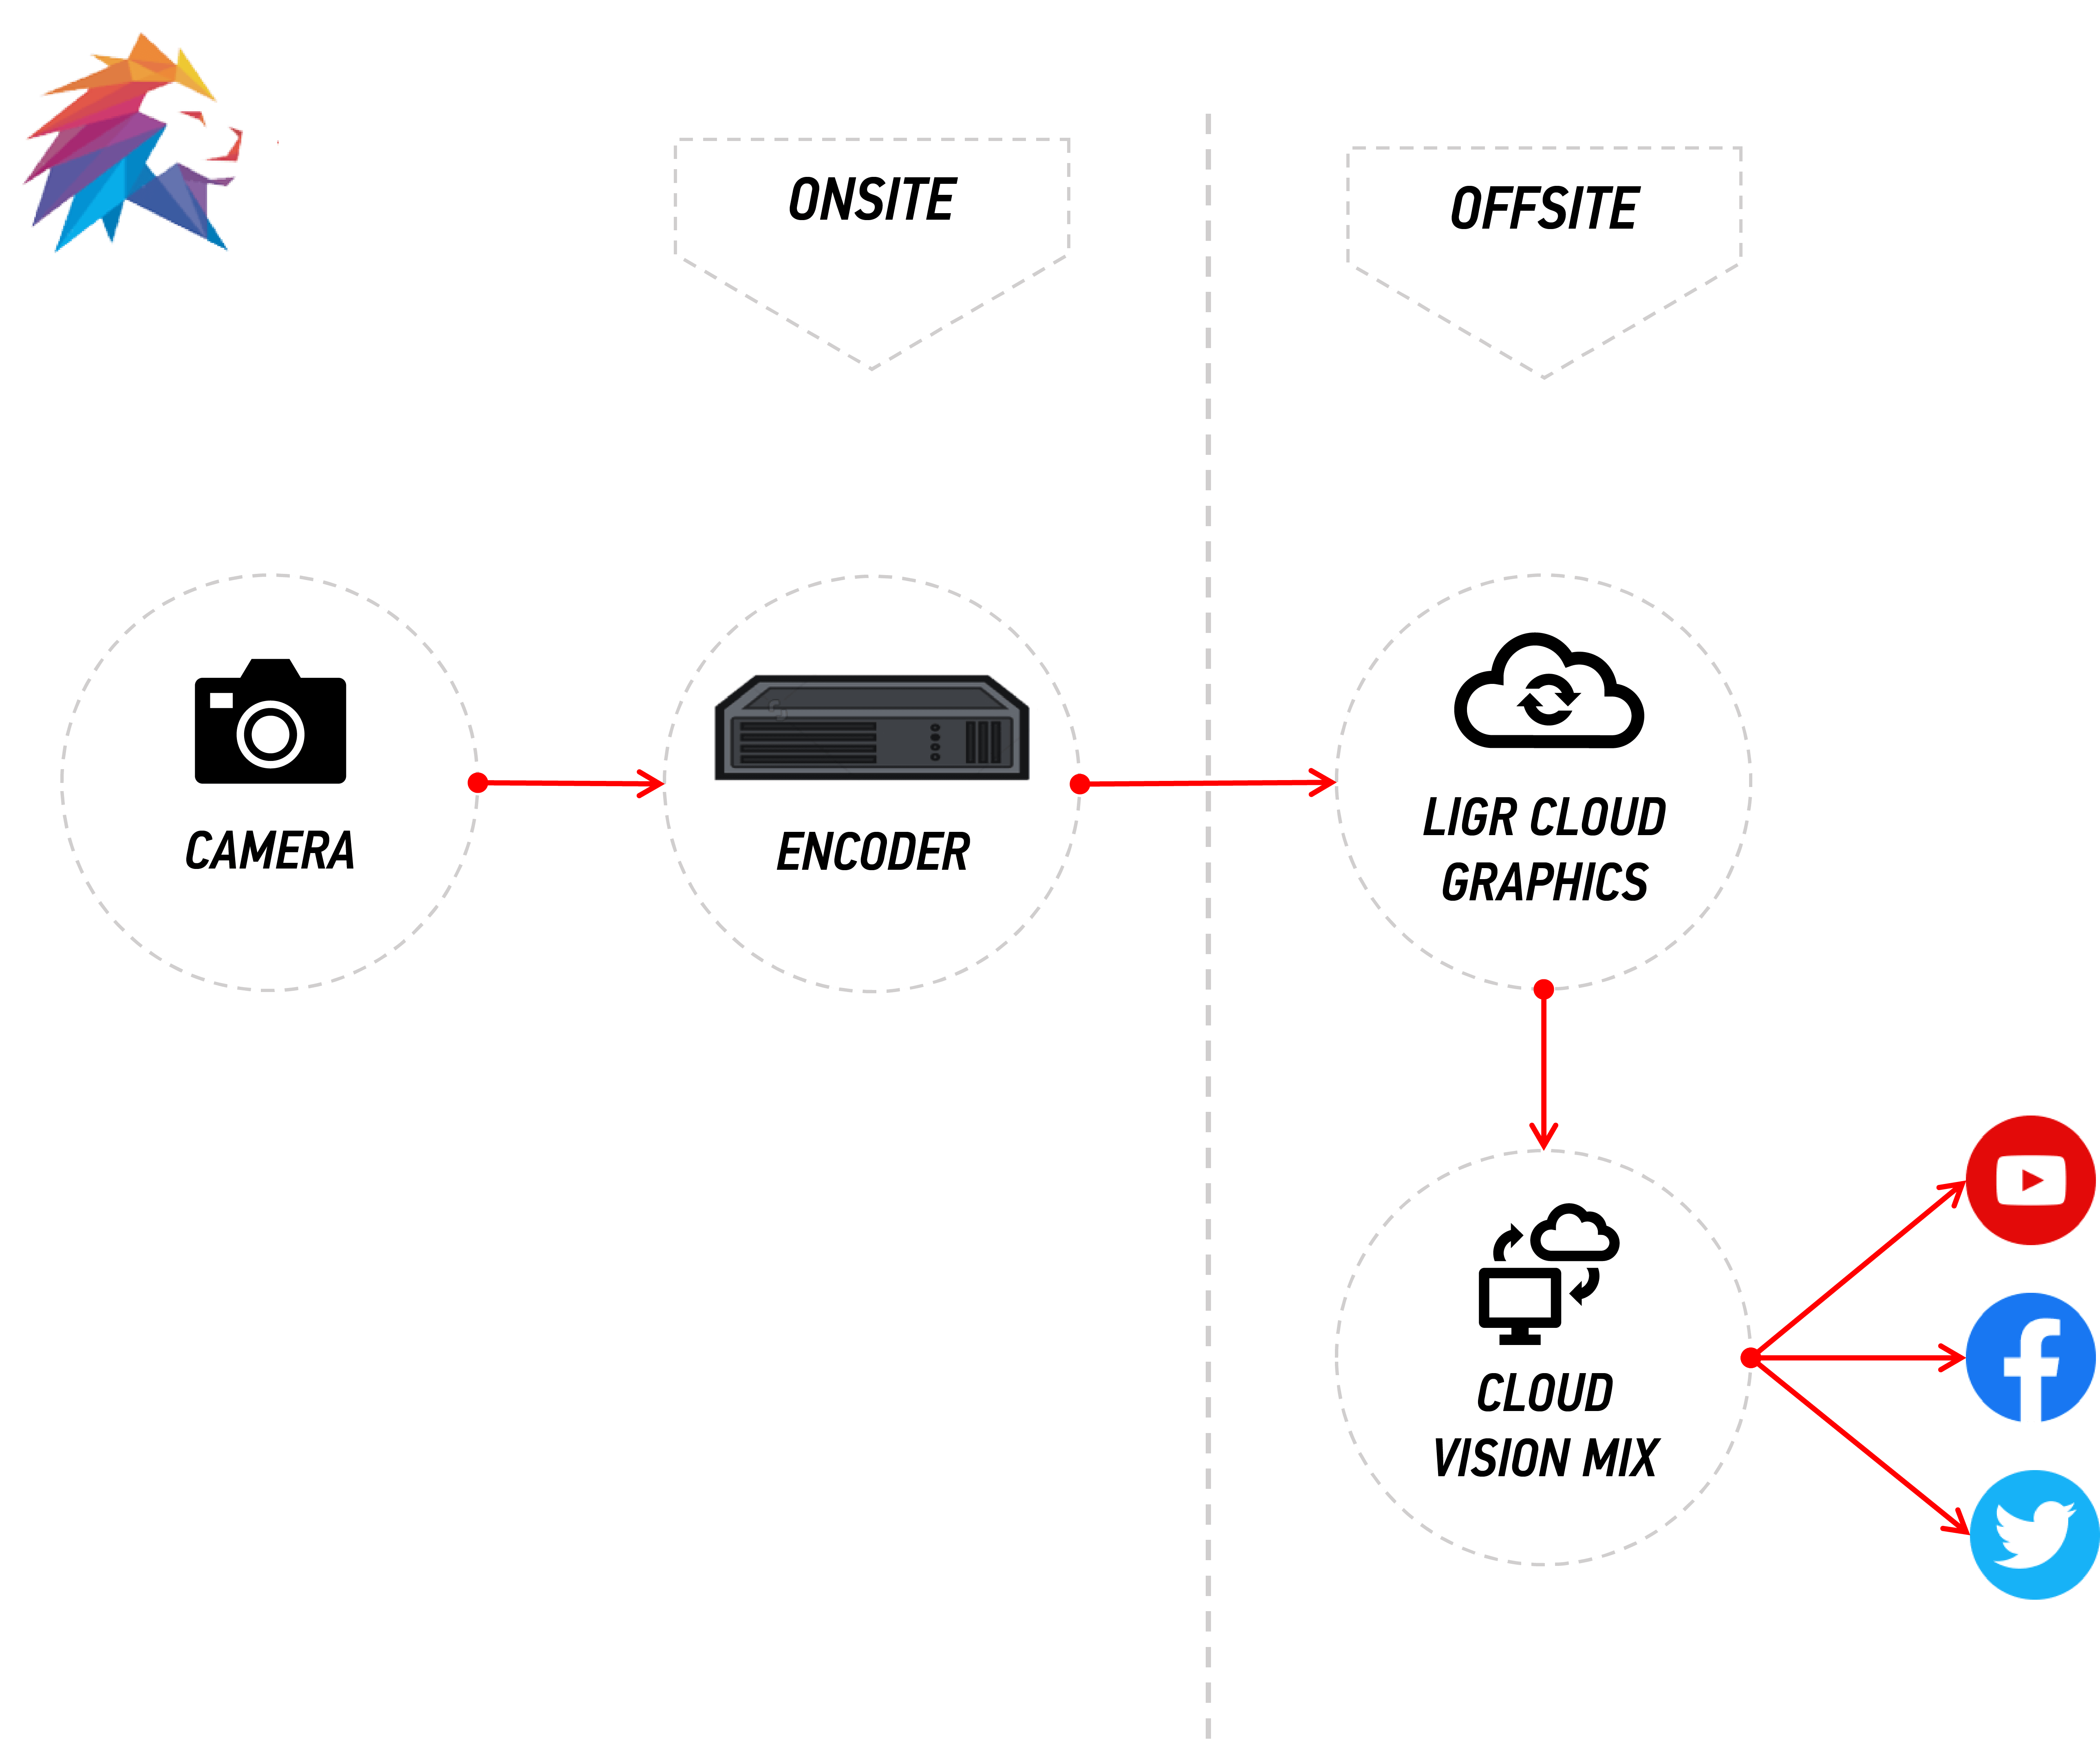 A simple remote, cloud-based production workflow with LIGR graphics applied in the cloud.